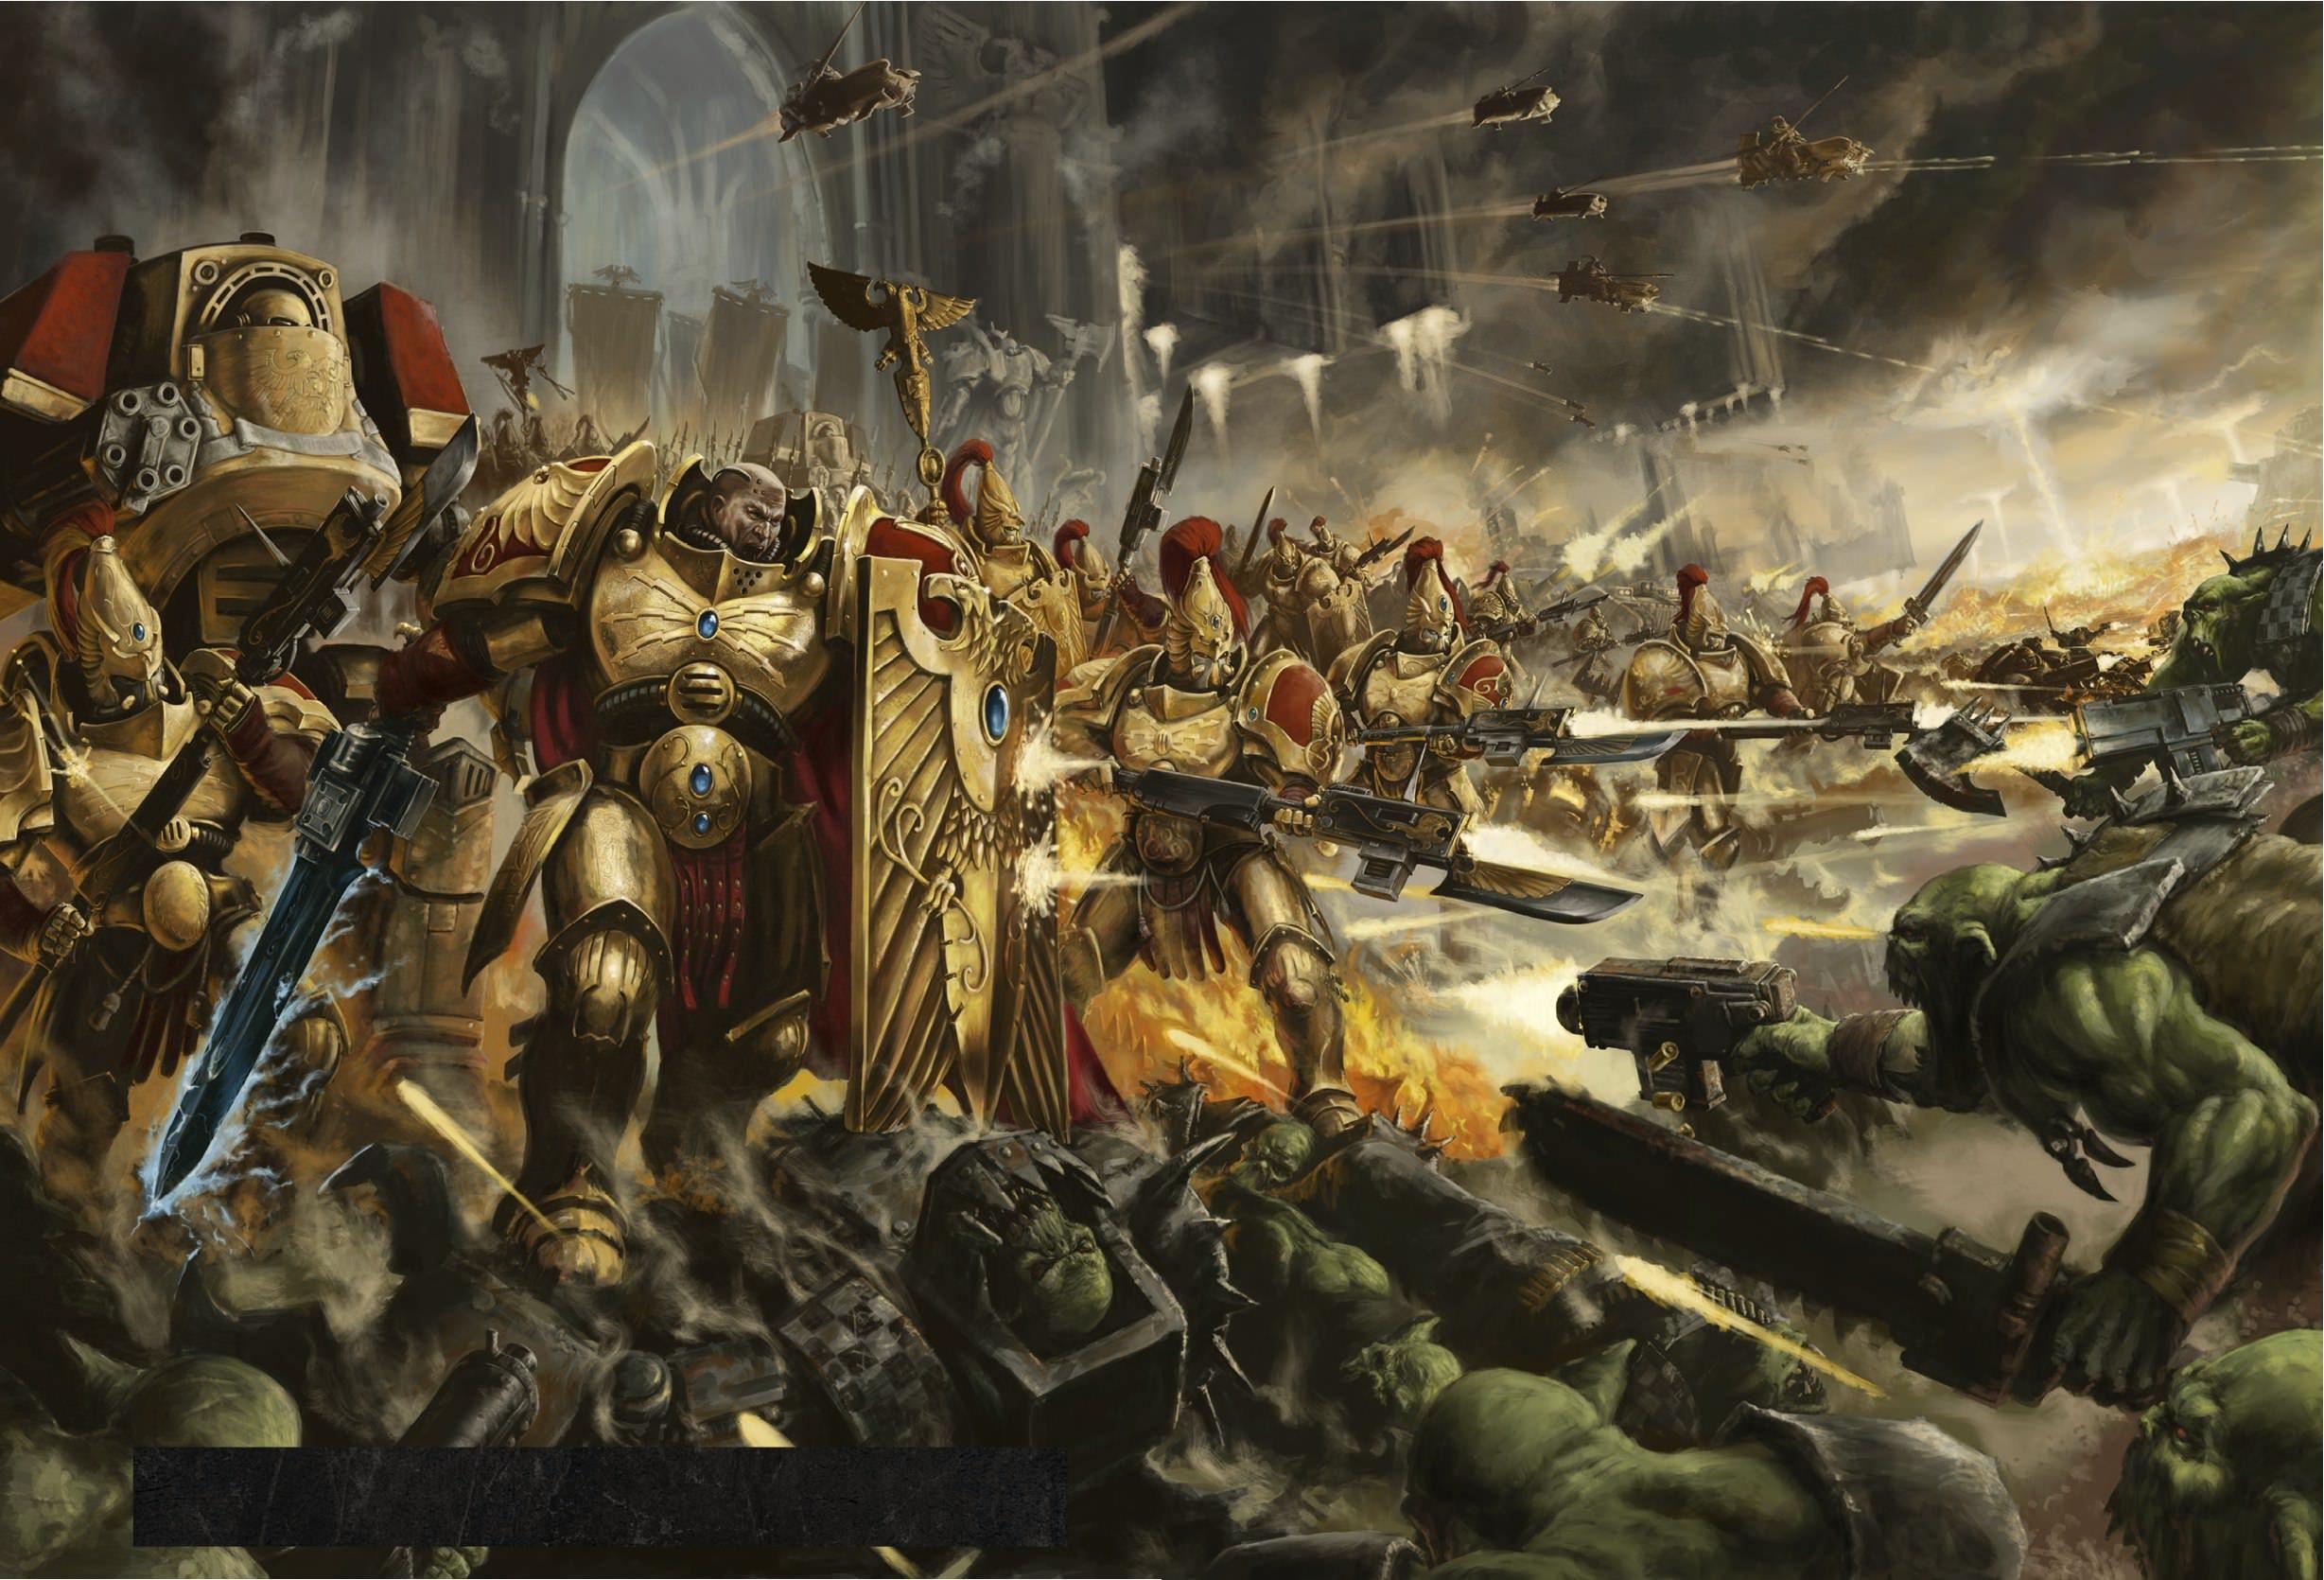 Buy Generic Custom Canvas Art Warhammer 40K Poster Warhammer 40000 Game  Wallpaper Dawn of War Wall Stickers Mural Bedroom Decoration705  Photographic Paper 60X90Cm Online at Low Prices in India  Amazonin